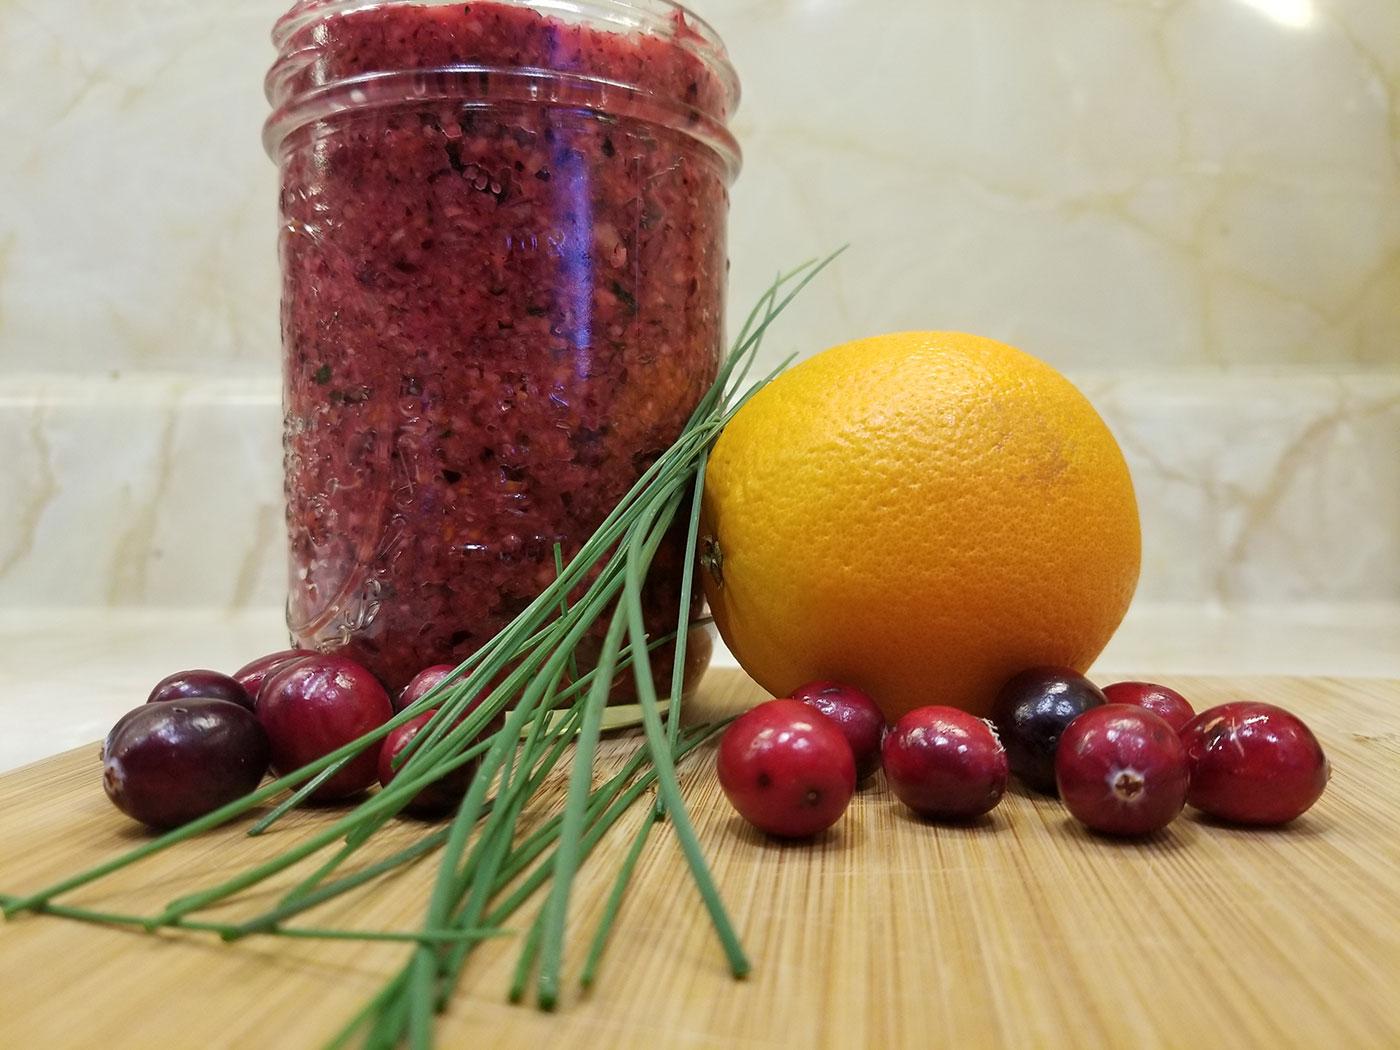 Wild onion cranberry relish brings flavor to winter dishes.